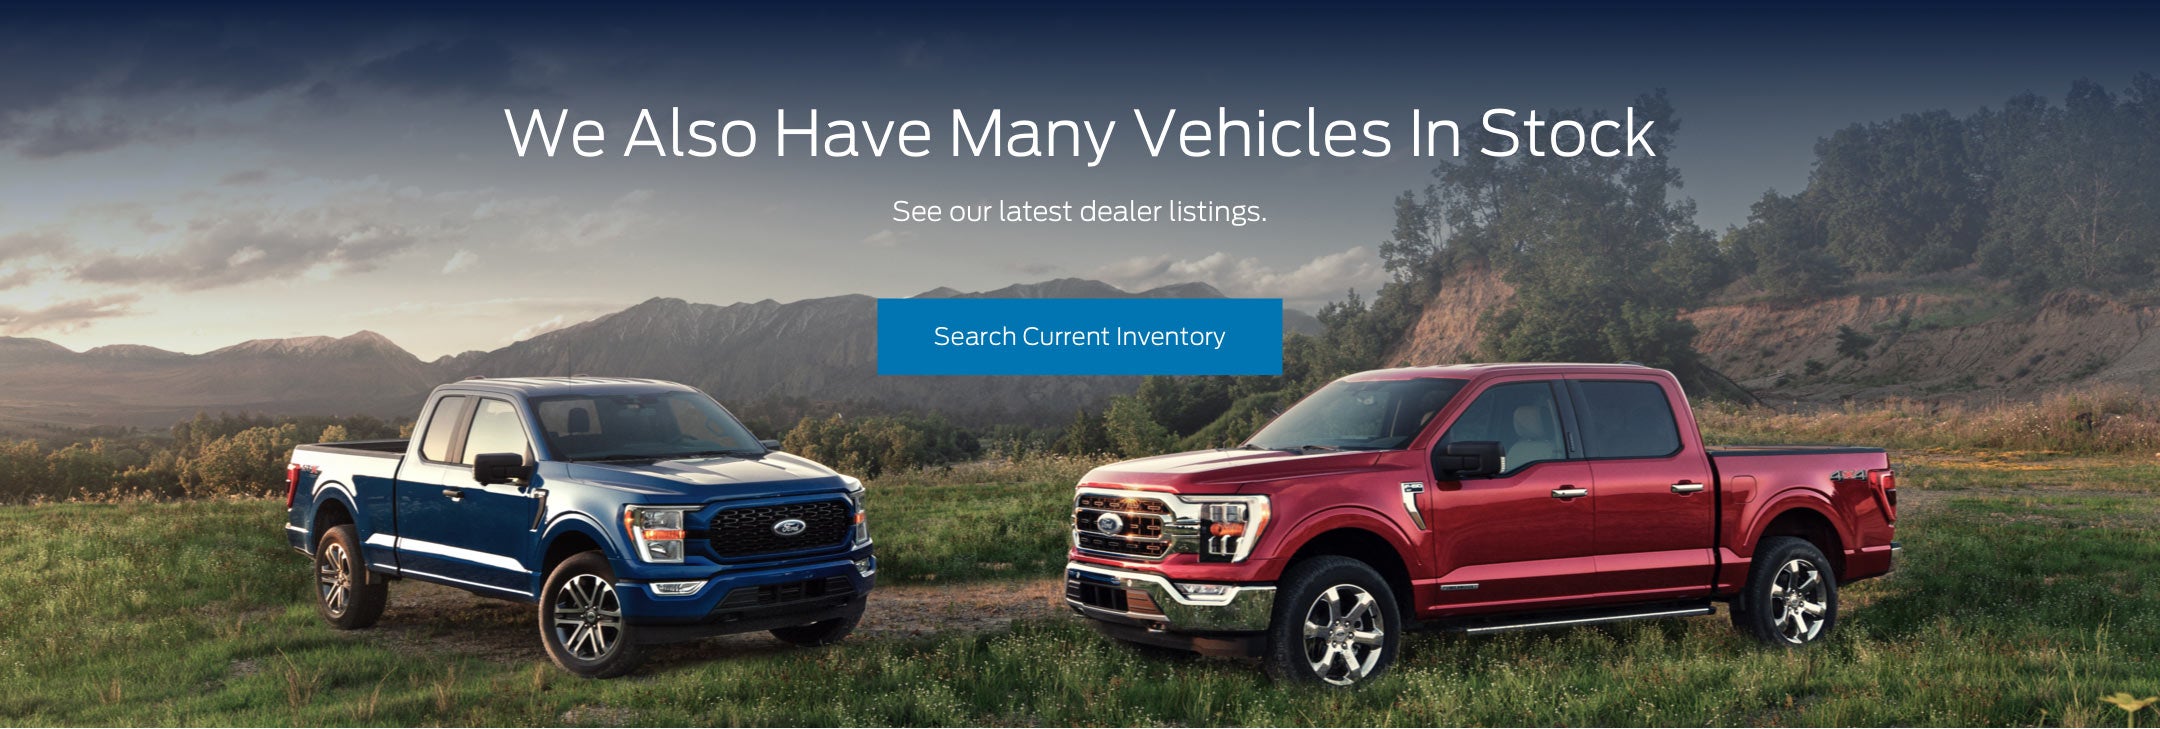 Ford vehicles in stock | B & B Ford in Barnwell SC